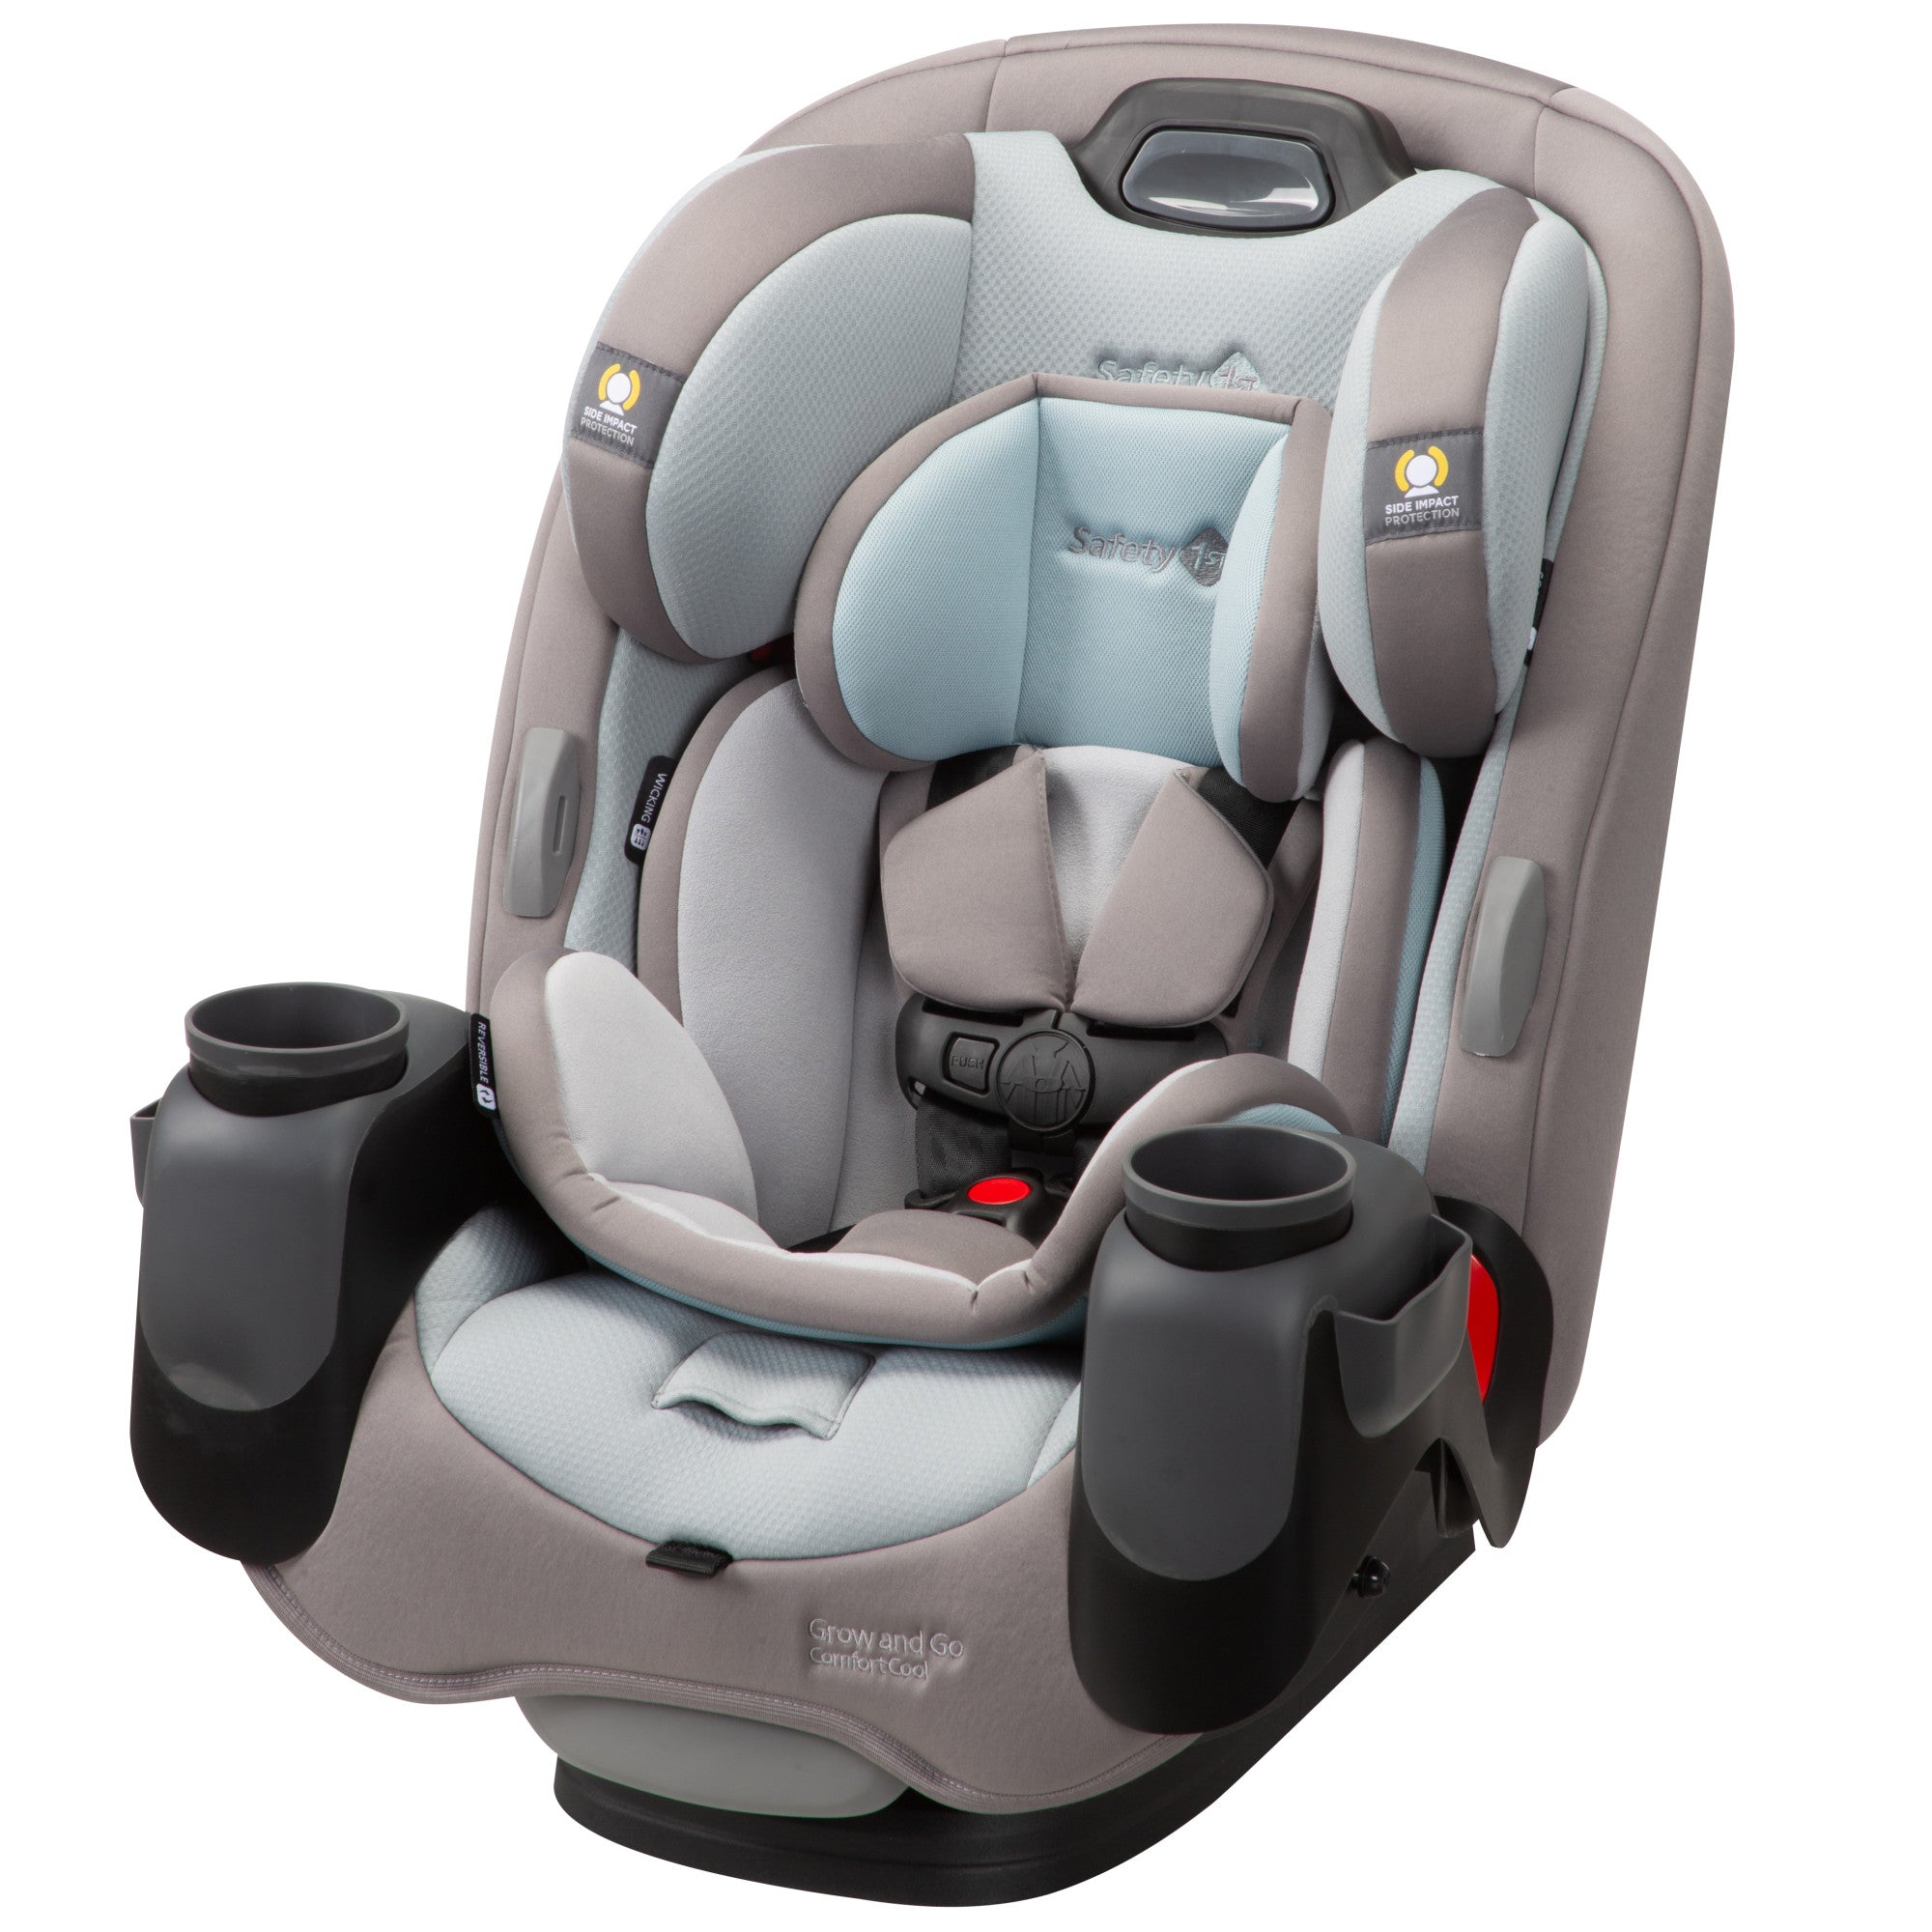 Safety 1st Grow and Go Comfort Cool 3-in-1 Convertible Car Seat Niagara Mist